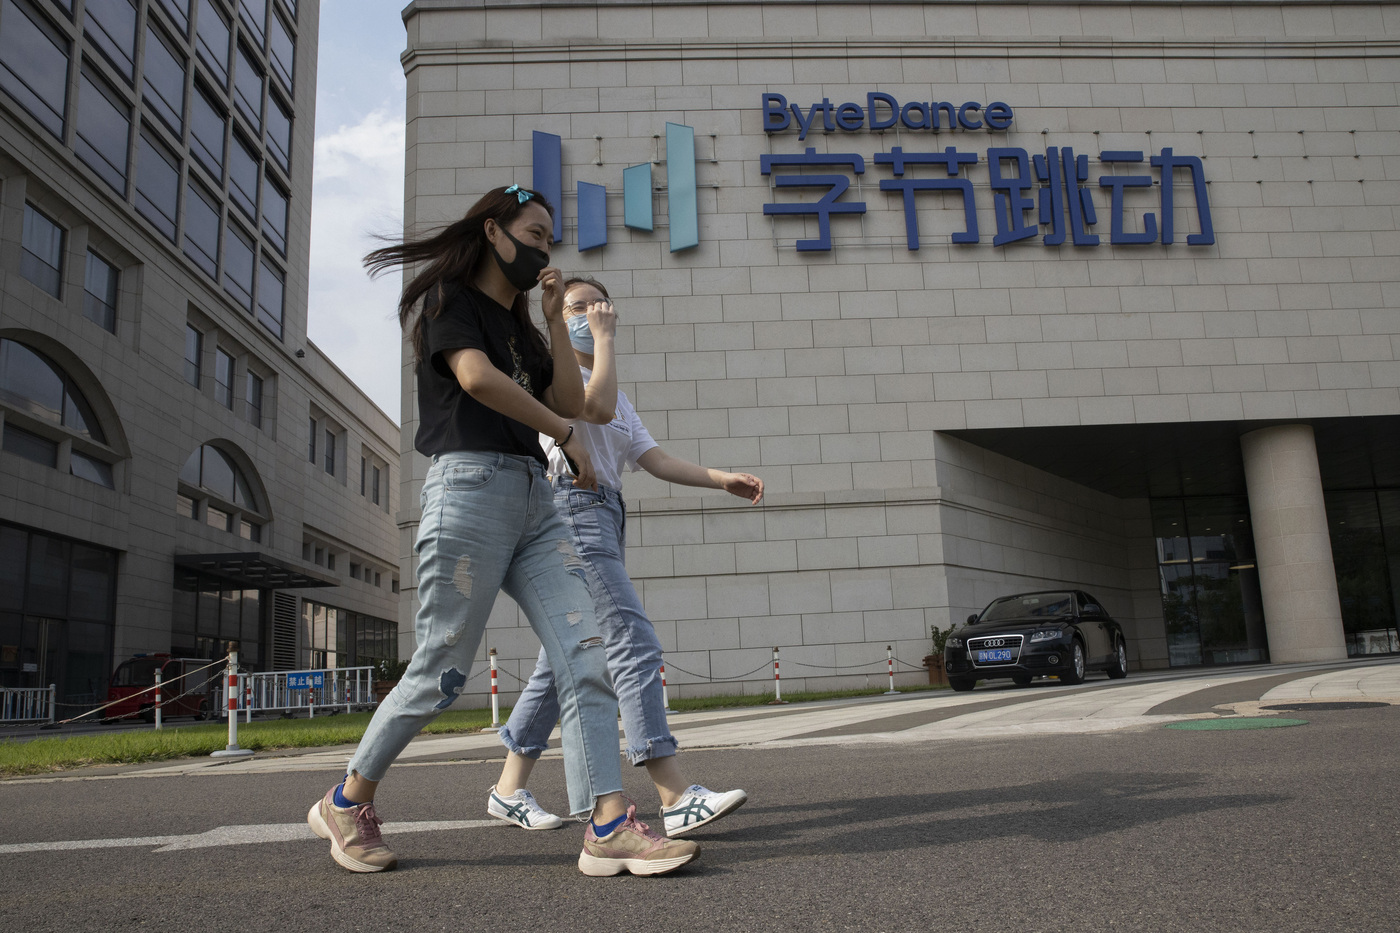 Women wearing masks to prevent the spread of the coronavirus chat as they pass by the ByteDance headquarters in Beijing, China on Friday, Aug. 7, 2020. President Donald Trump on Thursday ordered a sweeping but unspecified ban on dealings with the Chinese owners of consumer apps TikTok and WeChat, although it remains unclear if he has the legal authority to actually ban the apps from the U.S. TikTok is owned by Chinese company ByteDance. (AP Photo/Ng Han Guan)